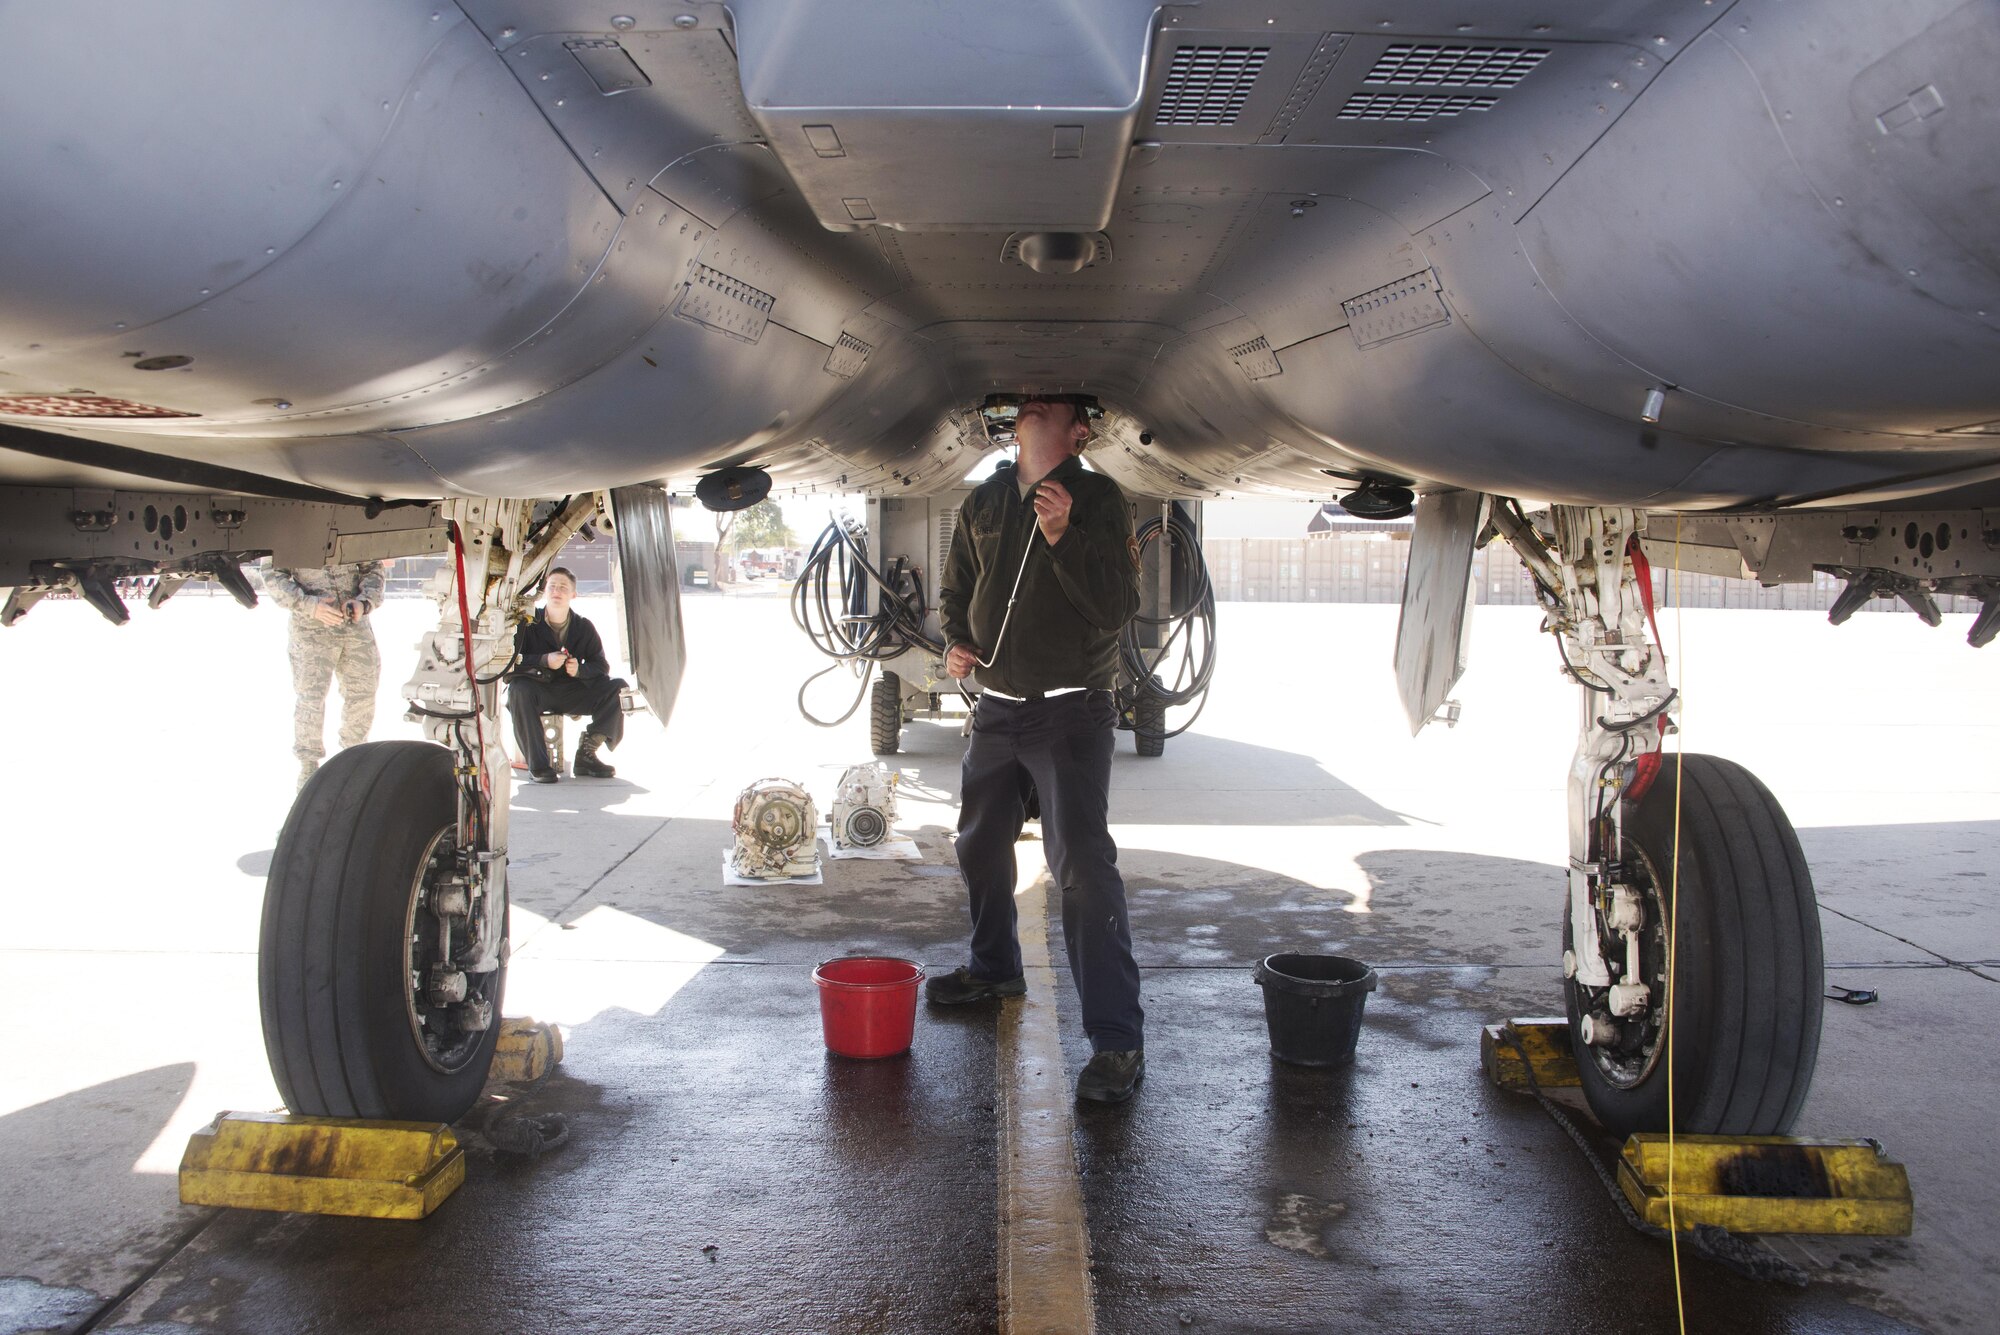 U.S. Air Force Staff Sgt. Mark Siefner, a crew chief with the 334th Aircraft Maintenance Unit, out of Seymour Johnson Air Force Base, N.C., repairs an F-15E Strike Eagle at Davis-Monthan AFB, Ariz., Jan. 18, 2017. New pilots from the 334th Fighter Squadron participated in a two week training course with the F-15E throughout southern Arizona's military operating areas. (U.S. Air Force photo by Airman 1st Class Giovanni Sims)